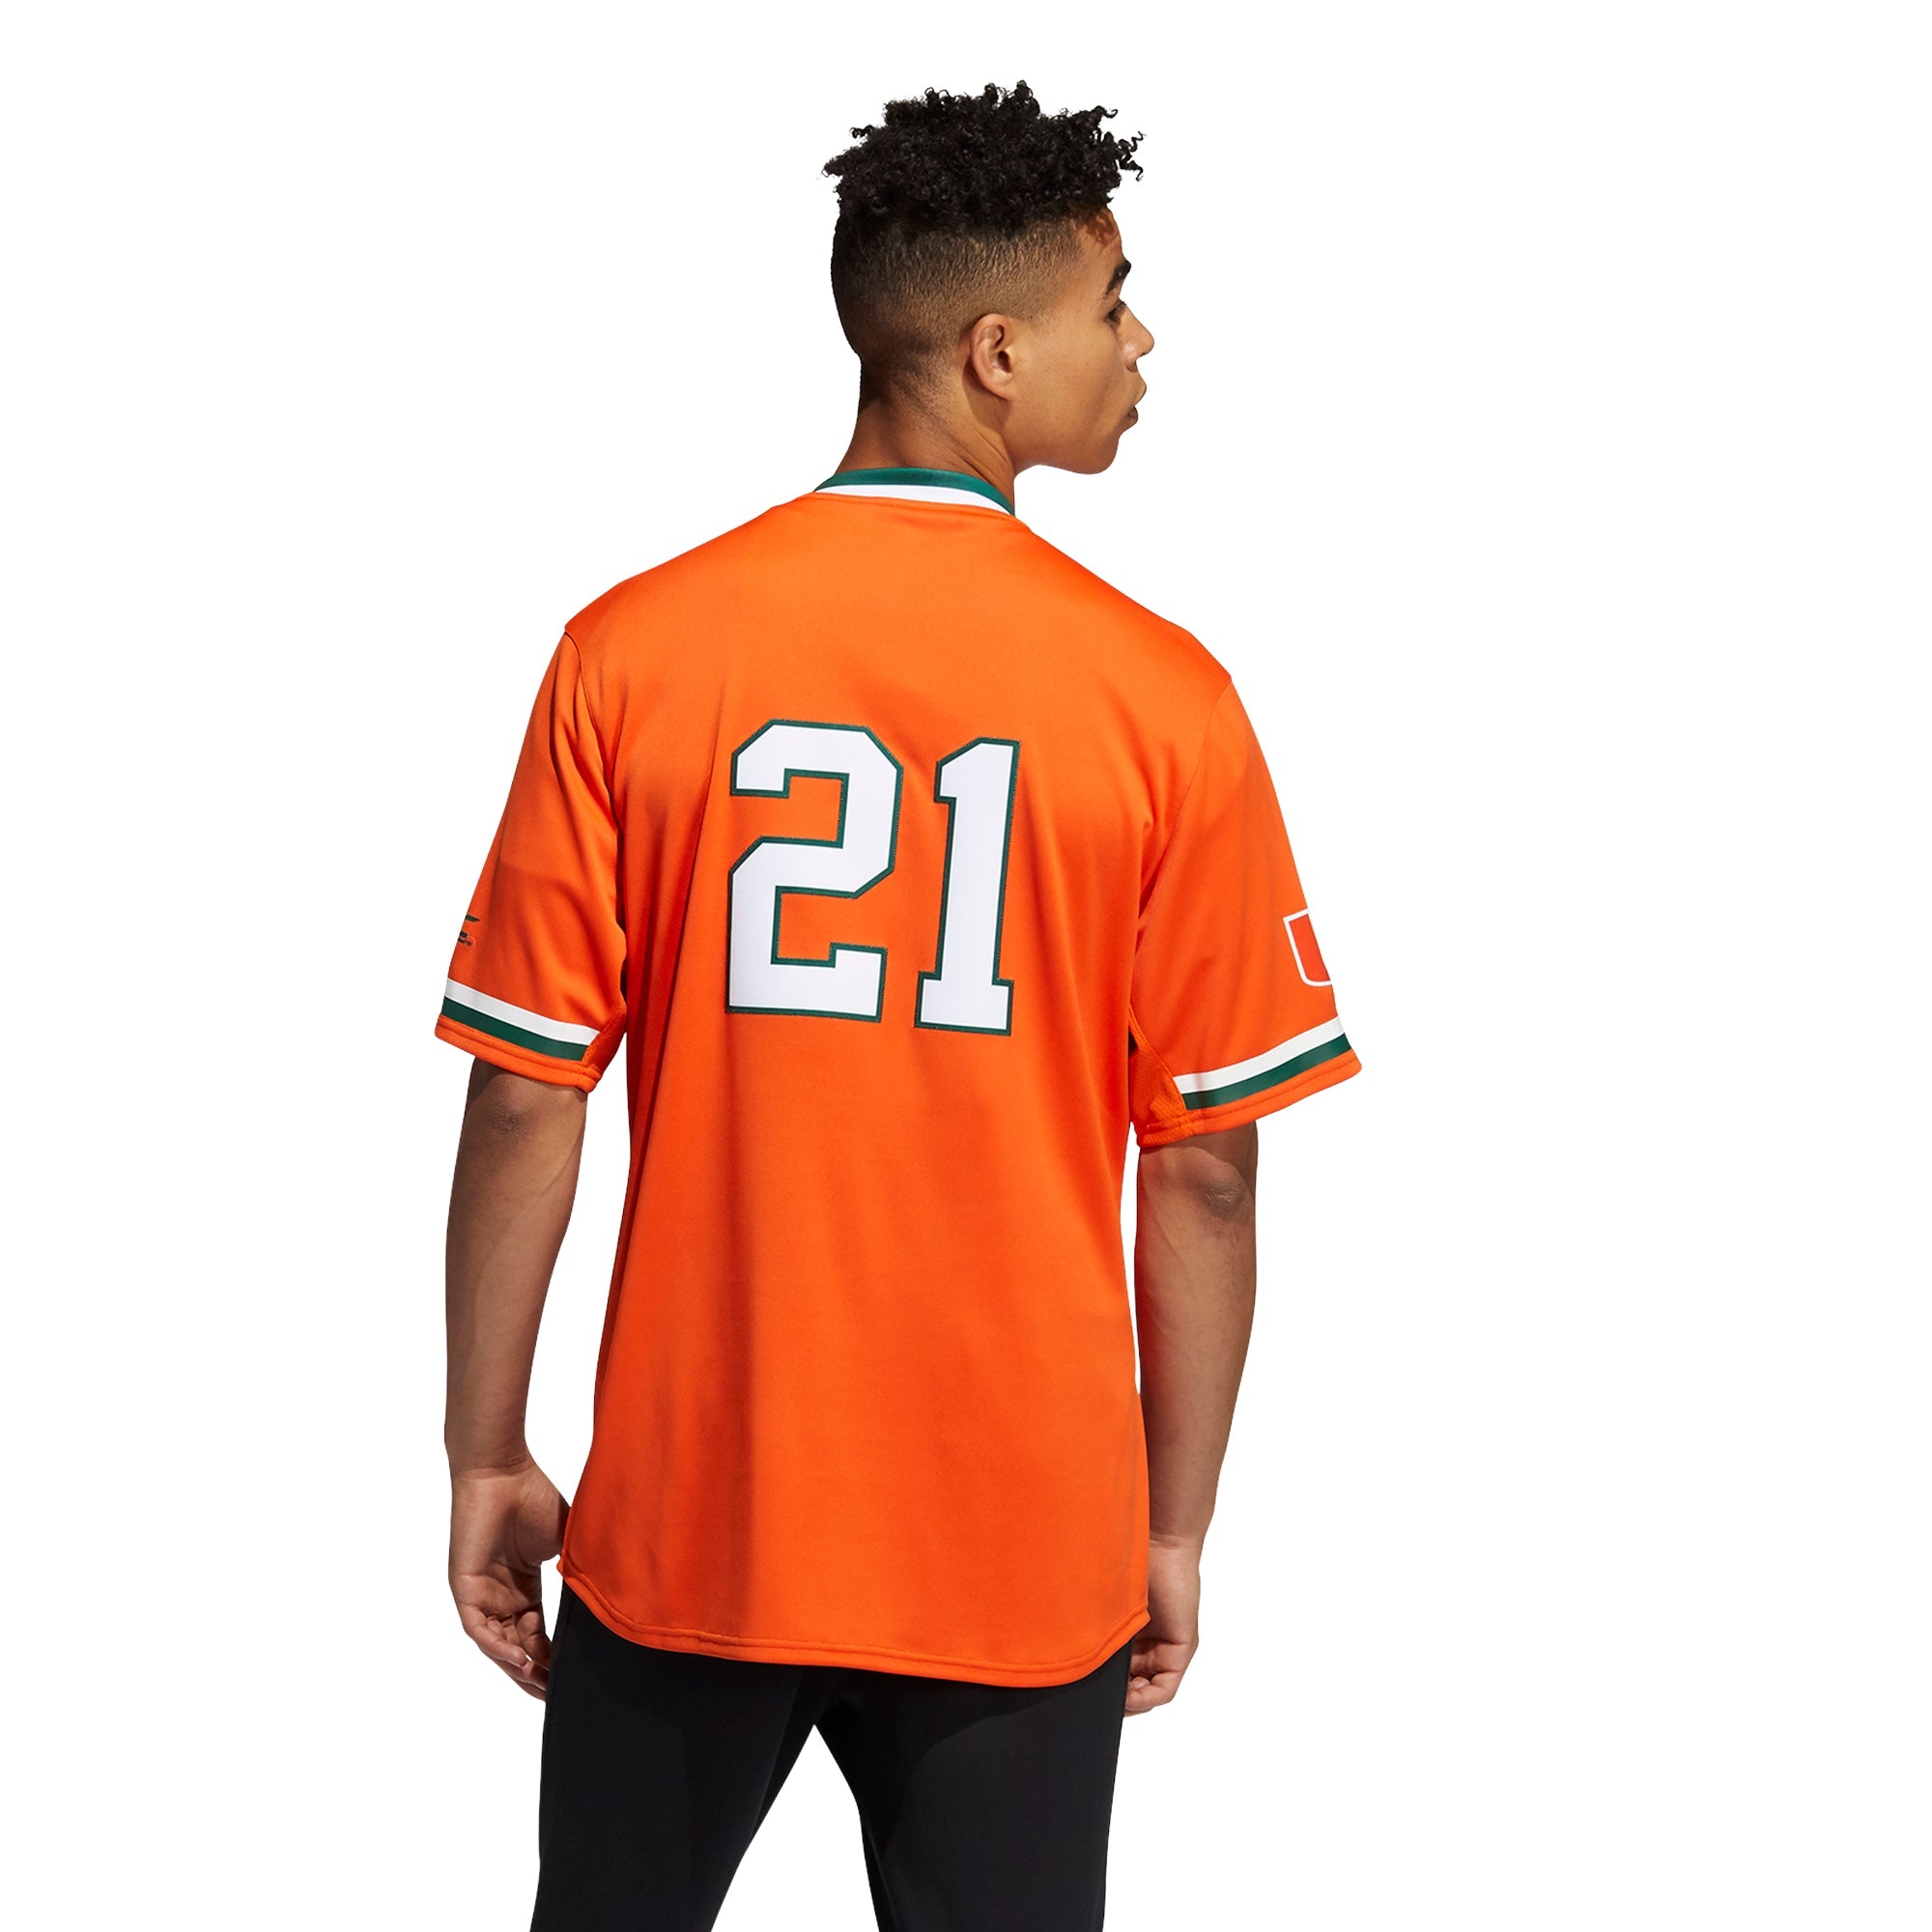 Miami Hurricanes Team-Issued #32 Orange Jersey from the